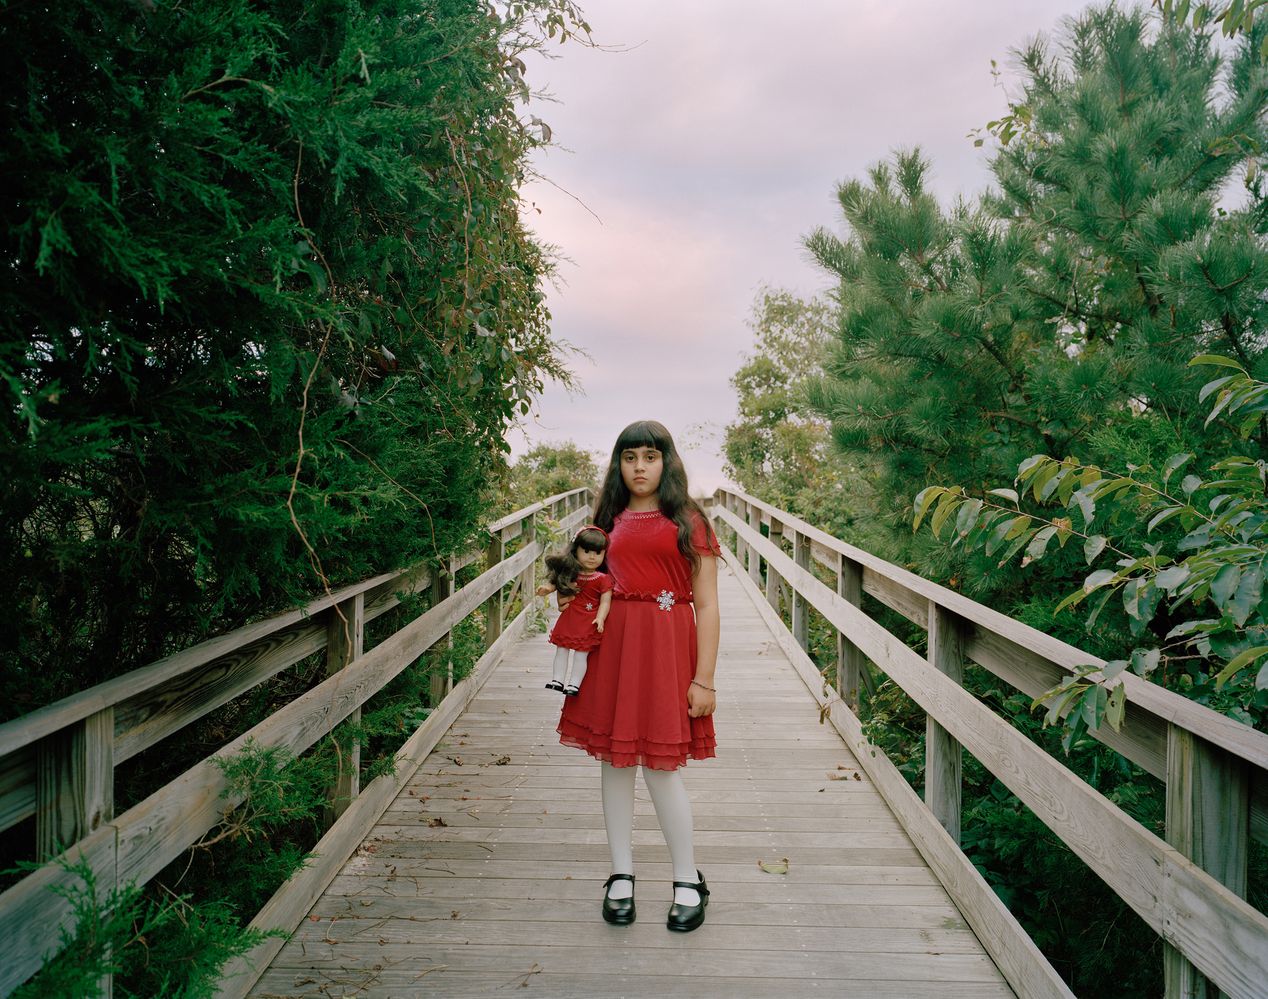 Young girl in a red dress holding a lookalike doll, environmental portrait photography, Ilona Szwarc, contemporary Los Angeles artist.